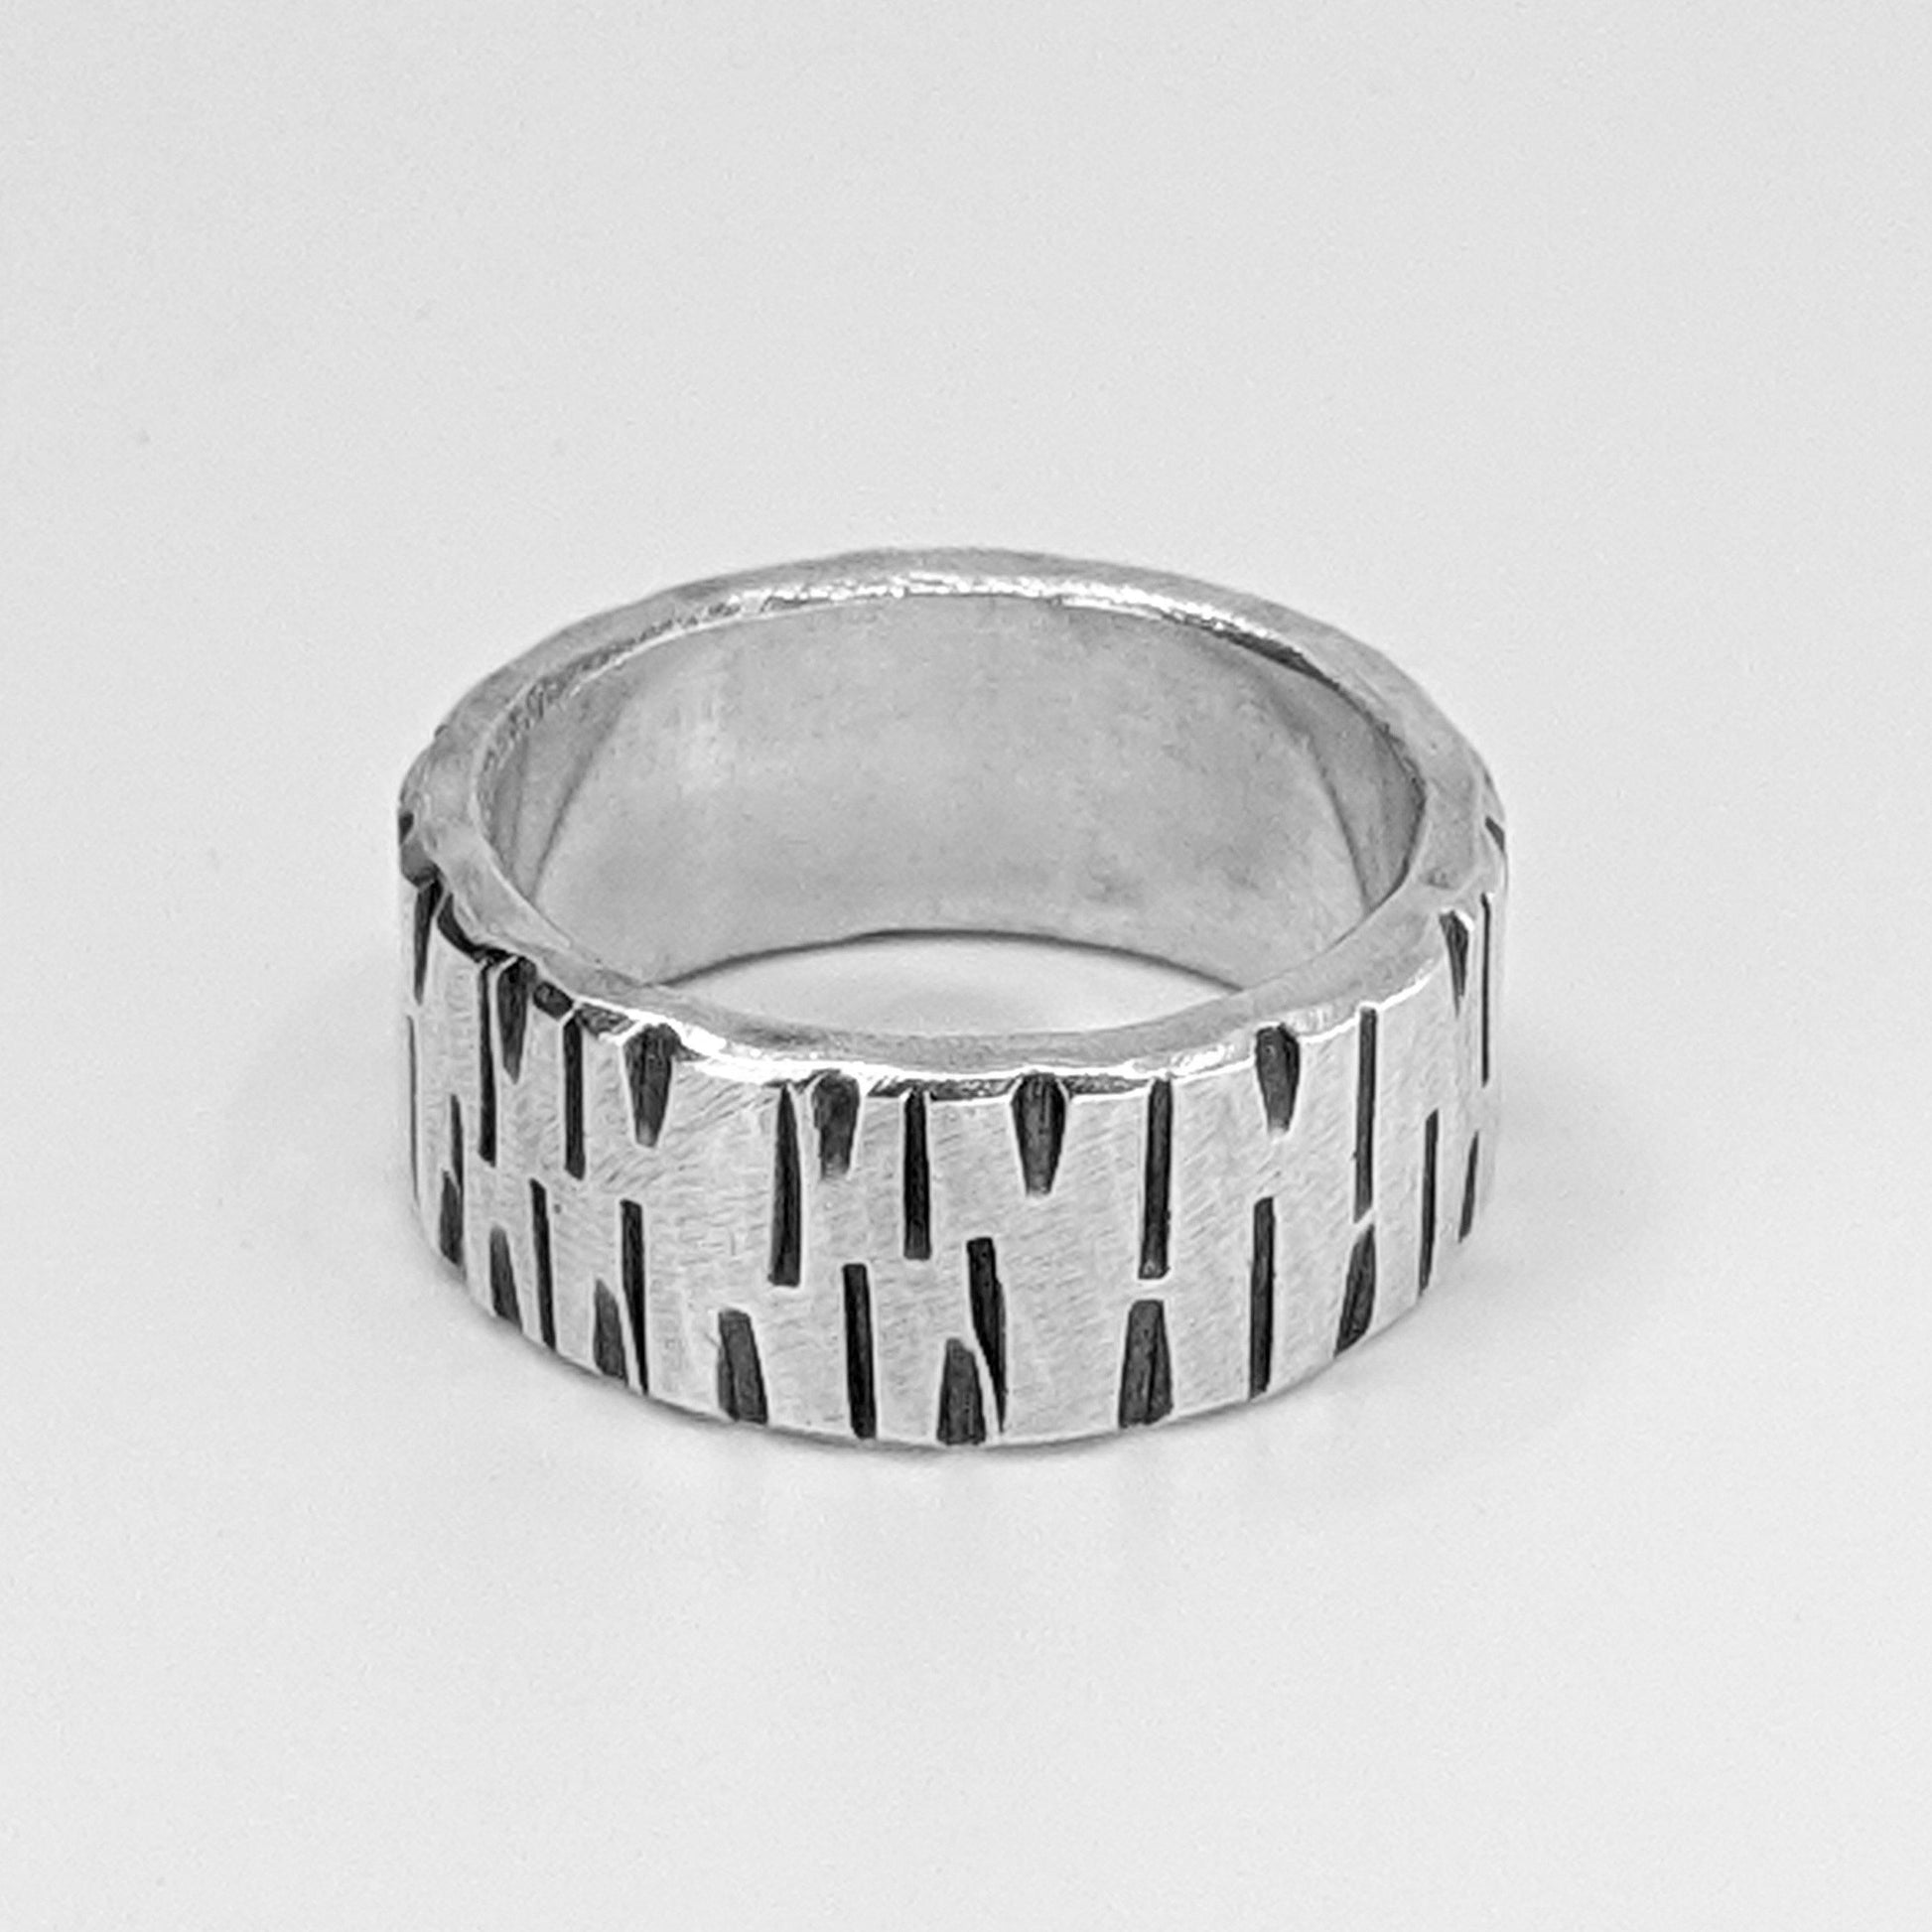 Sterling Silver Ring - Wide Band - Size 6 3/4 - Kristin Christopher